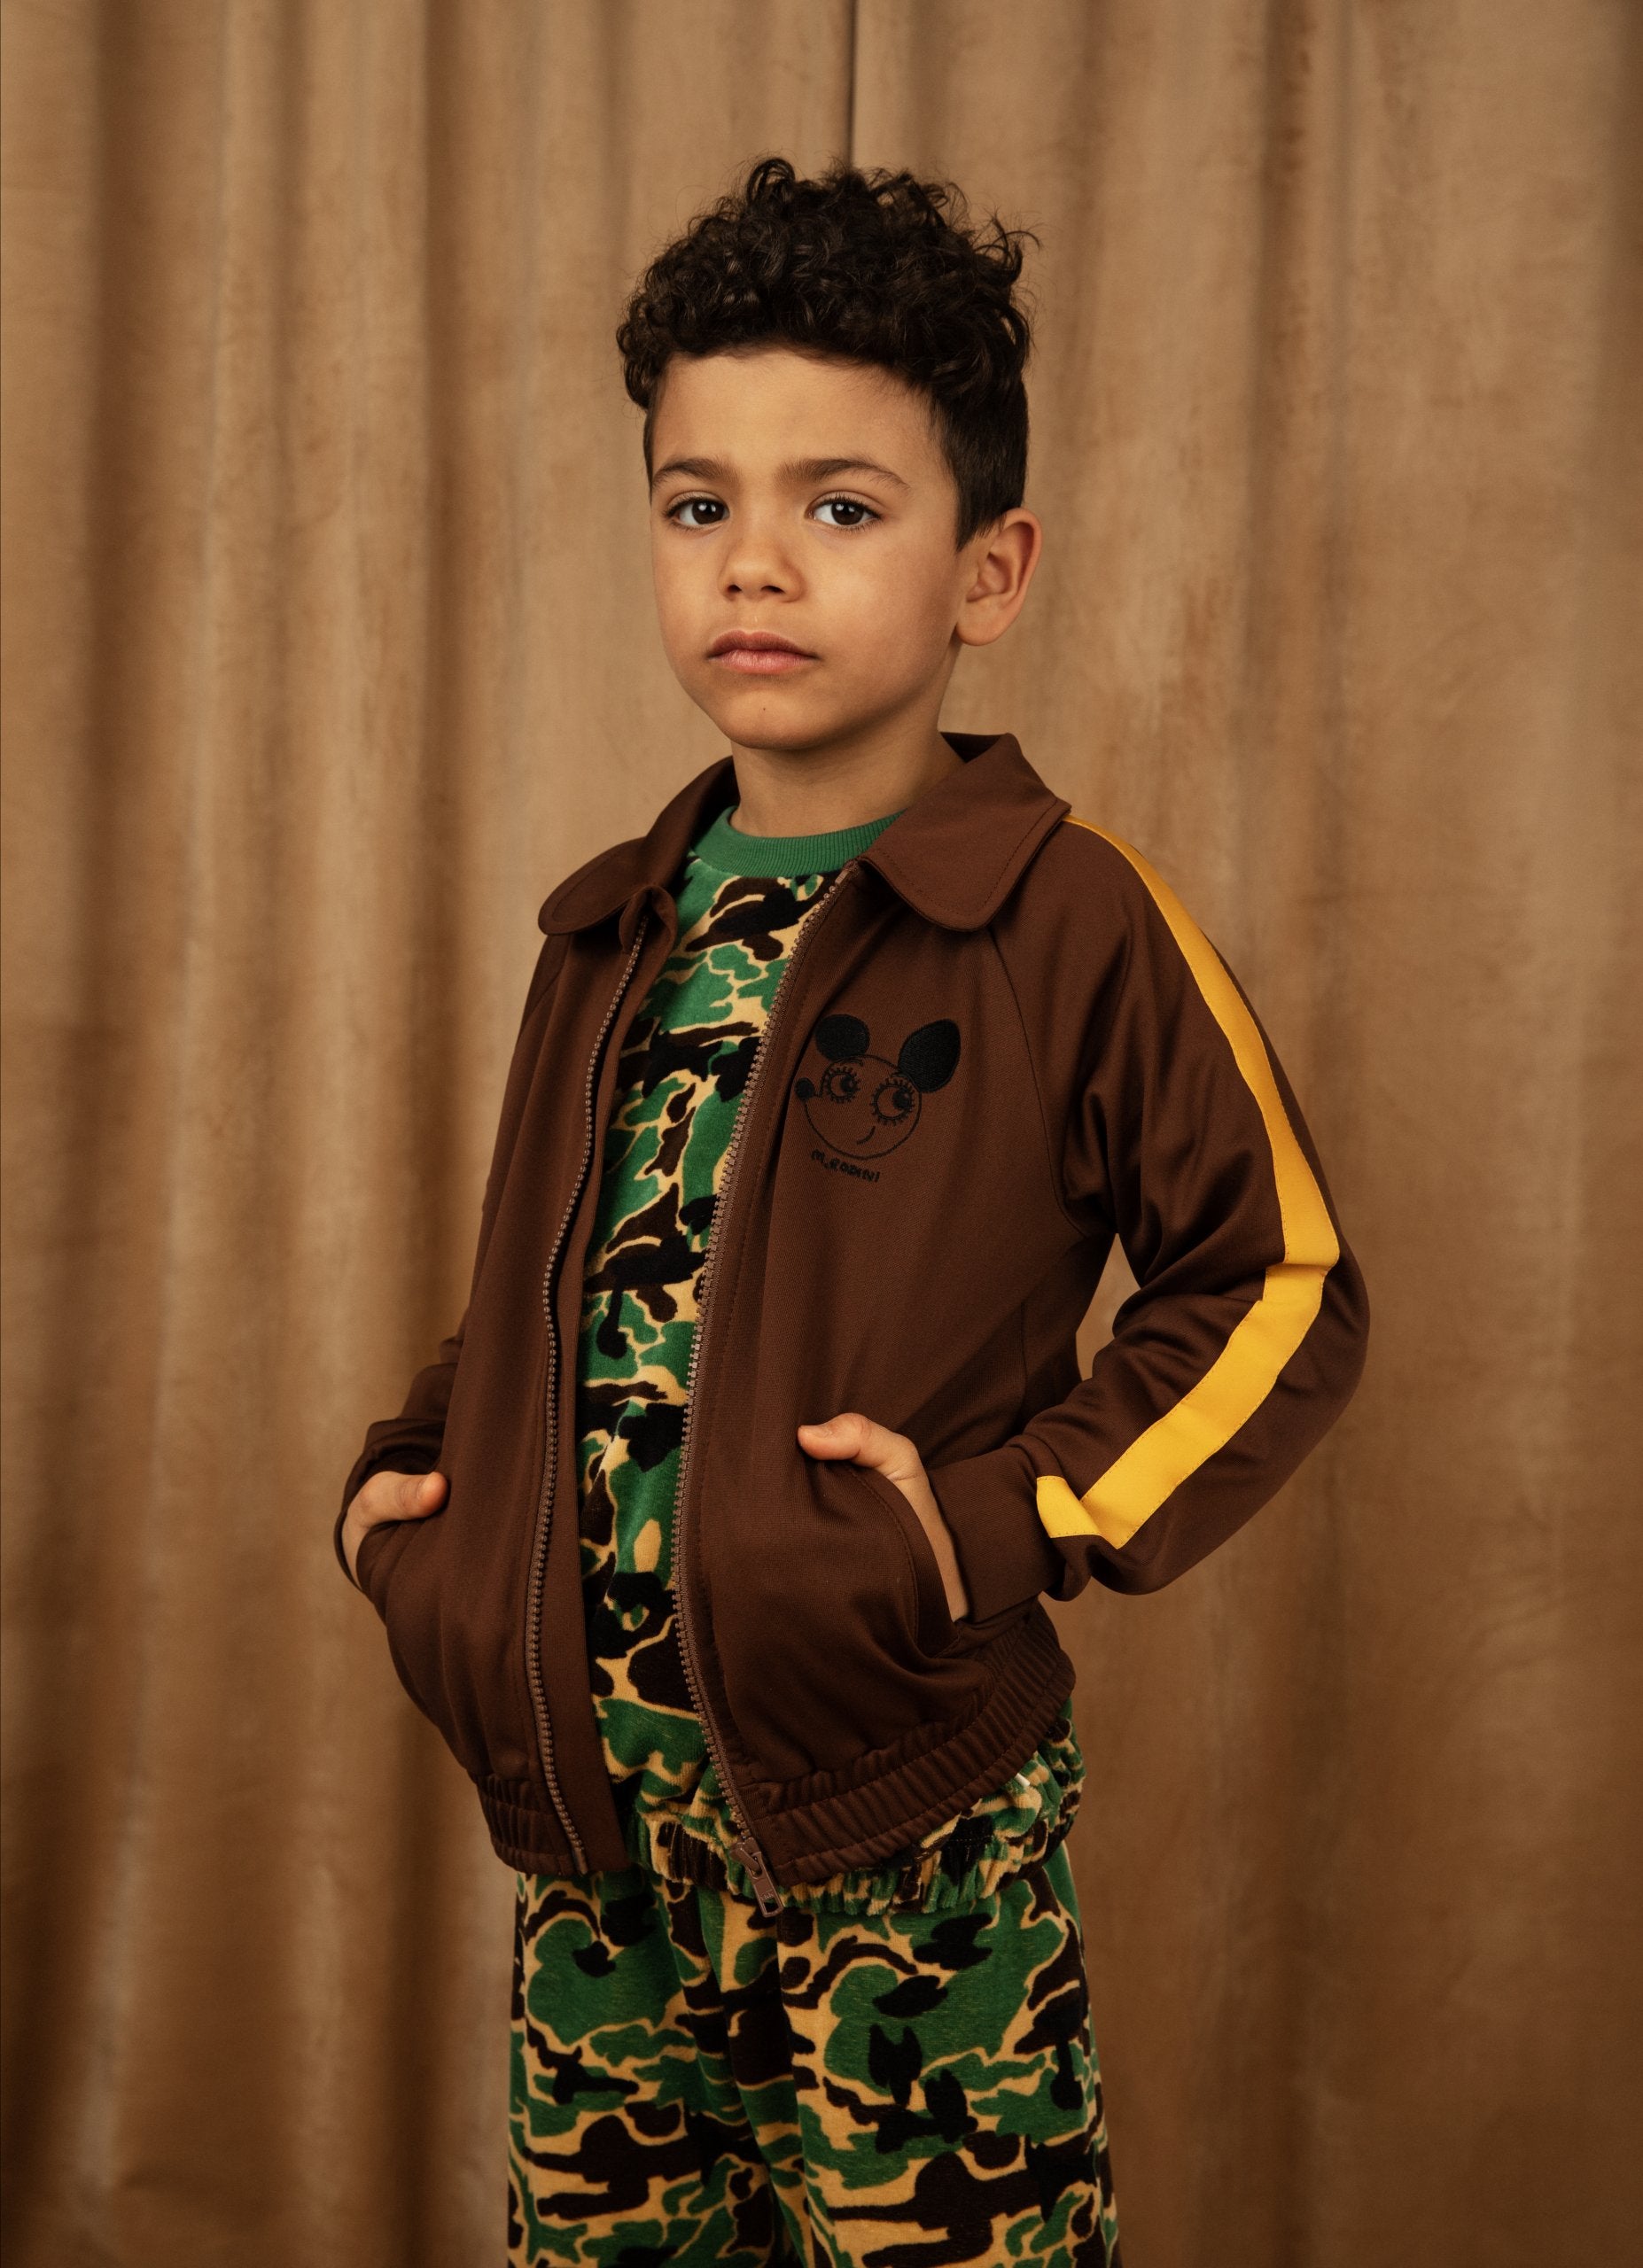 MINI RODINI - Camo aop velour trousers in green camouflage print and brown zip up tracksuit top with yellow stripe